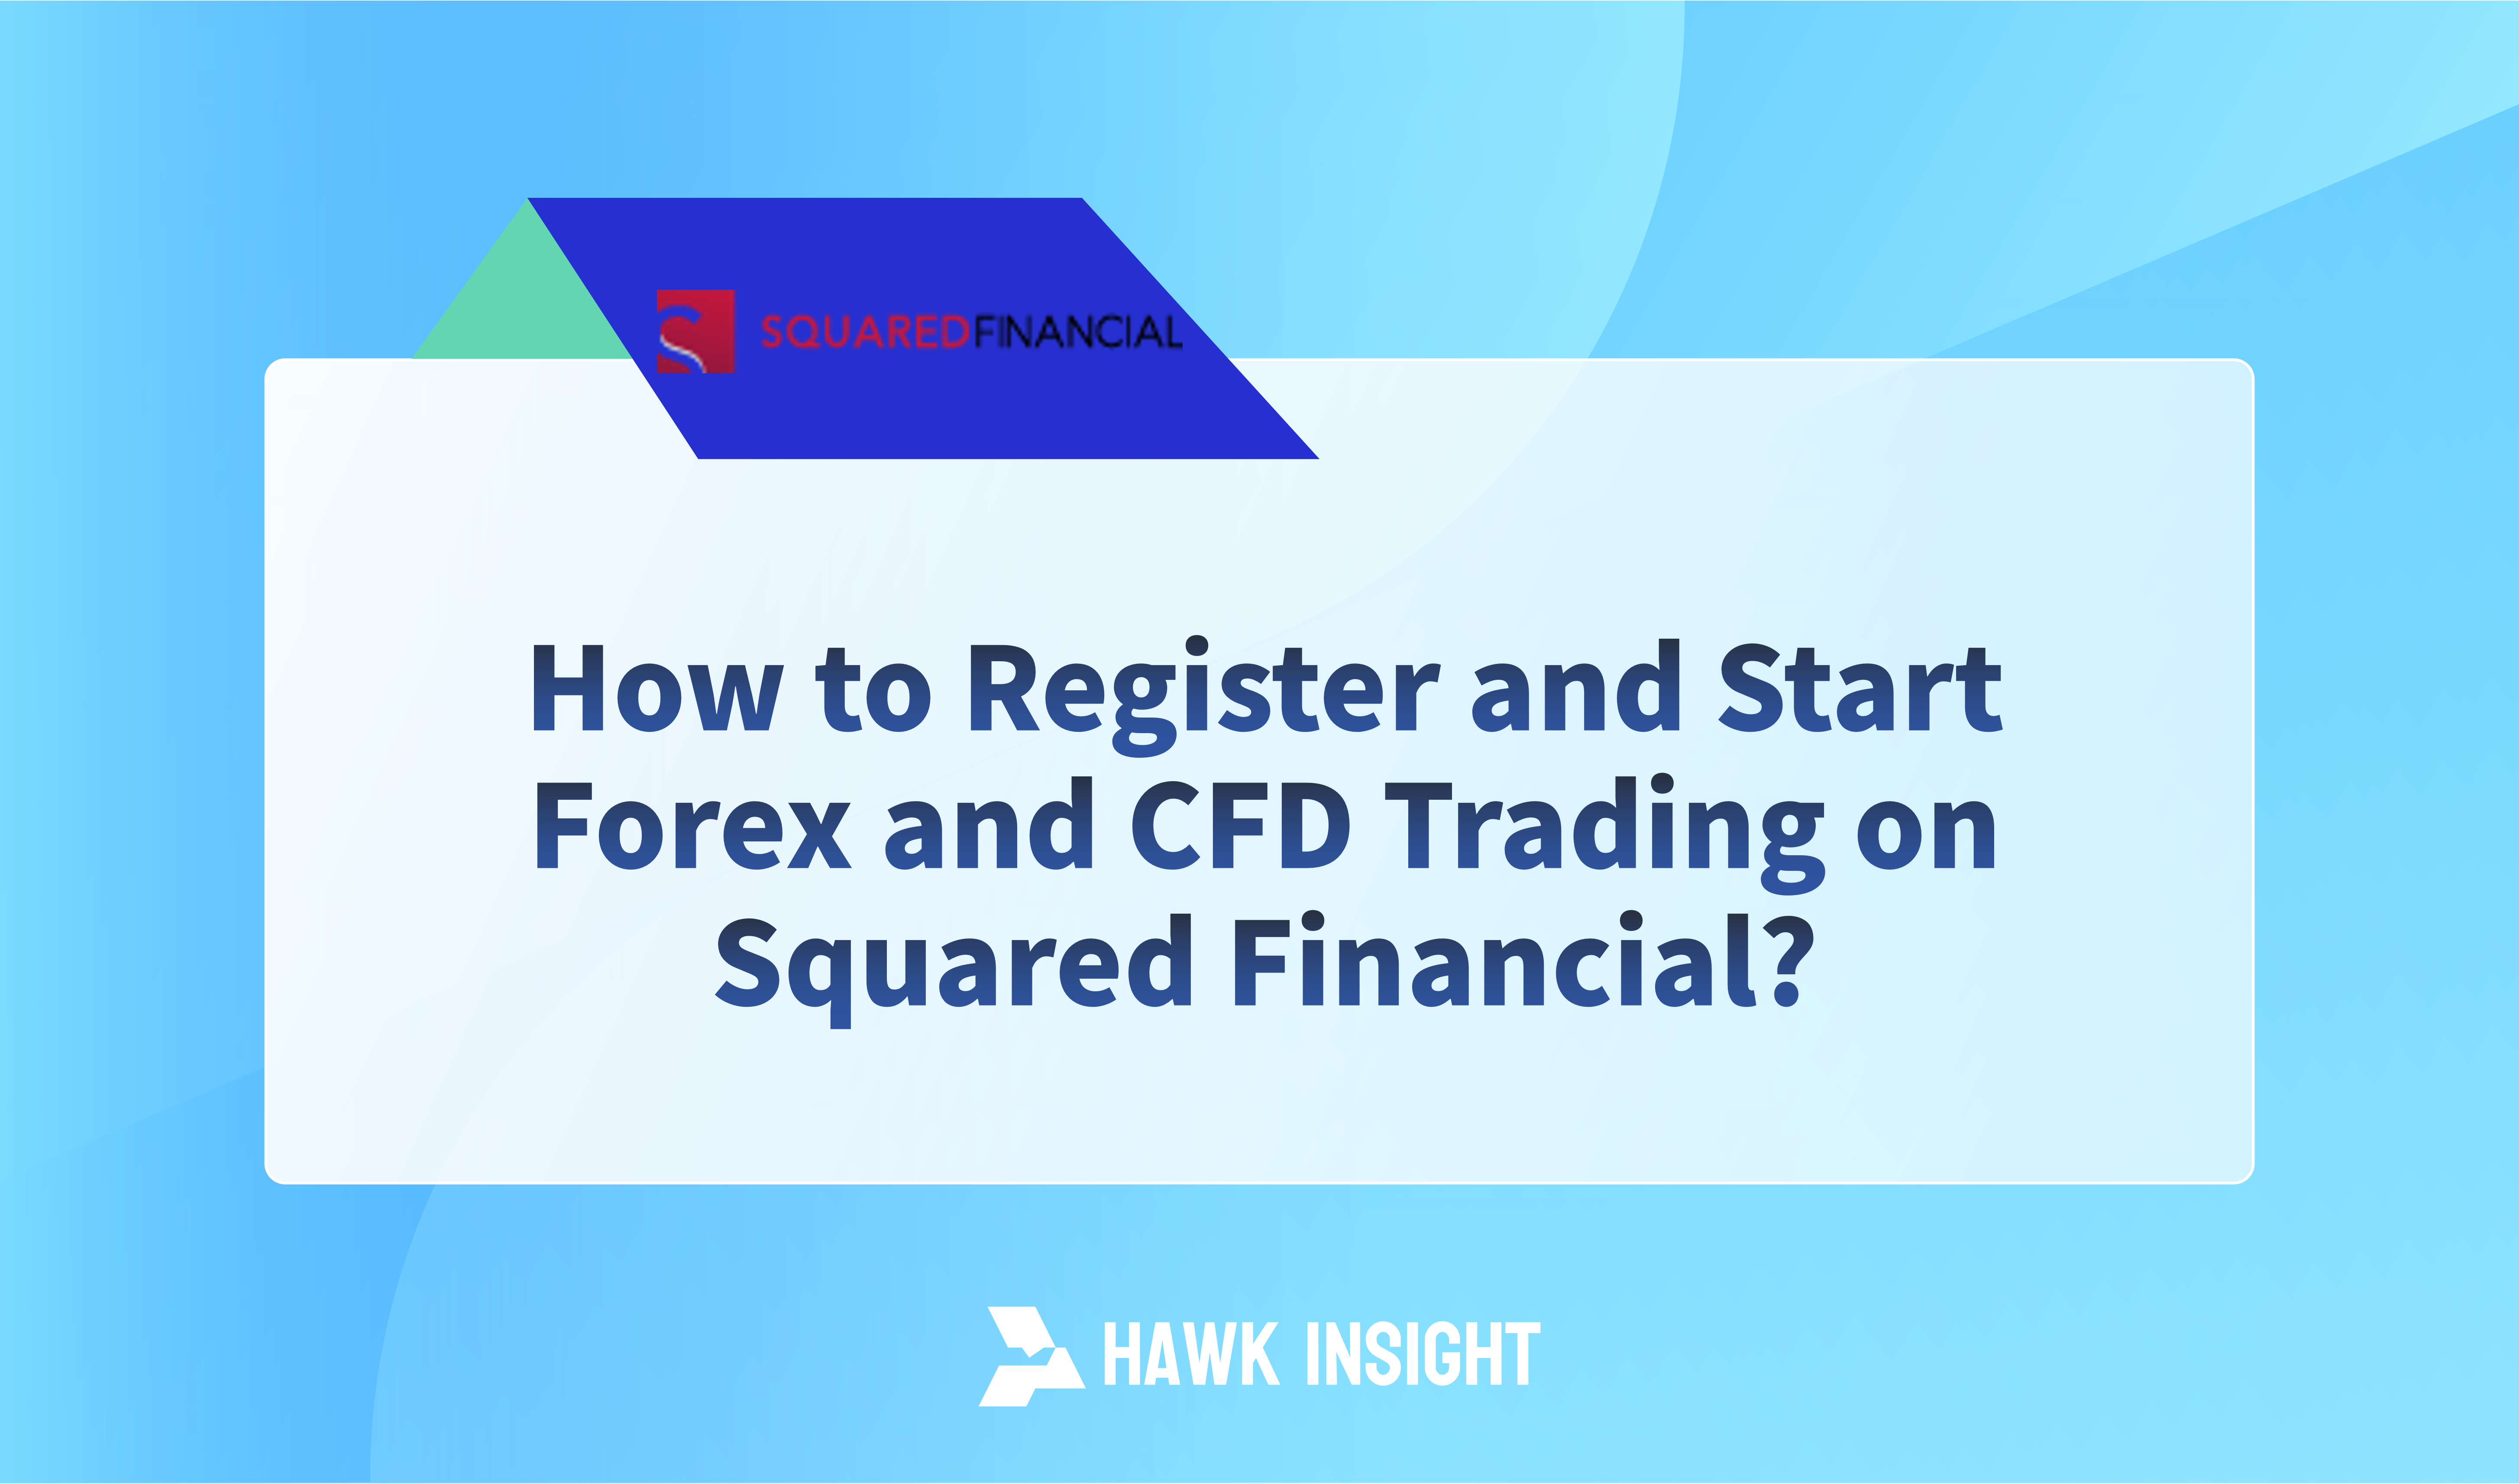 How to Register and Start Forex and CFD Trading on SquaredFinancial?